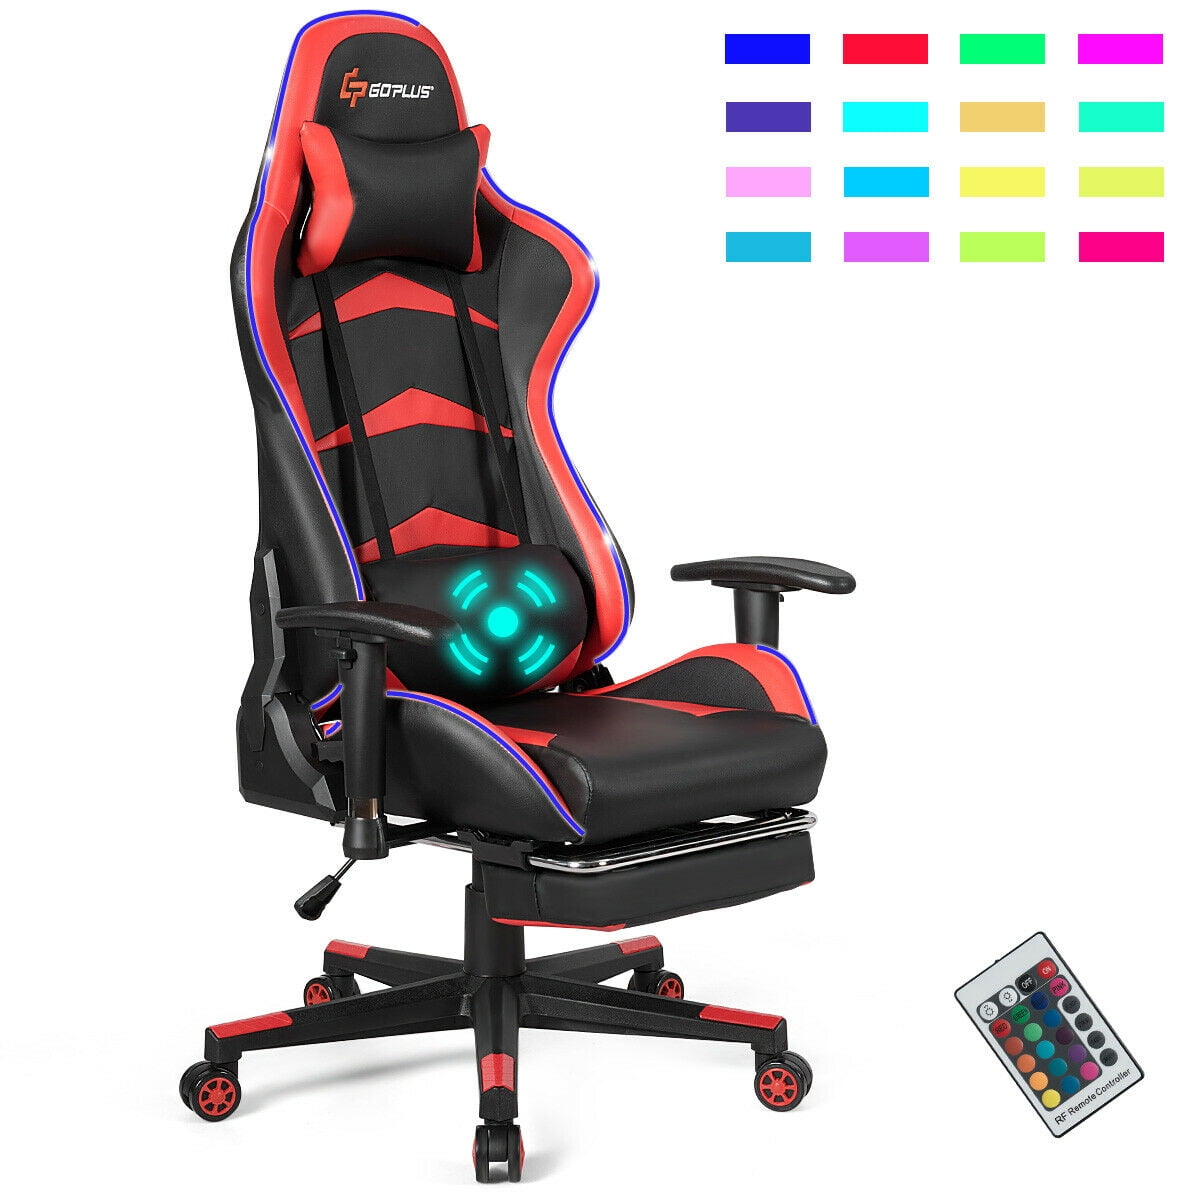 Goplus Massage LED Gaming Chair Reclining Racing Chair w